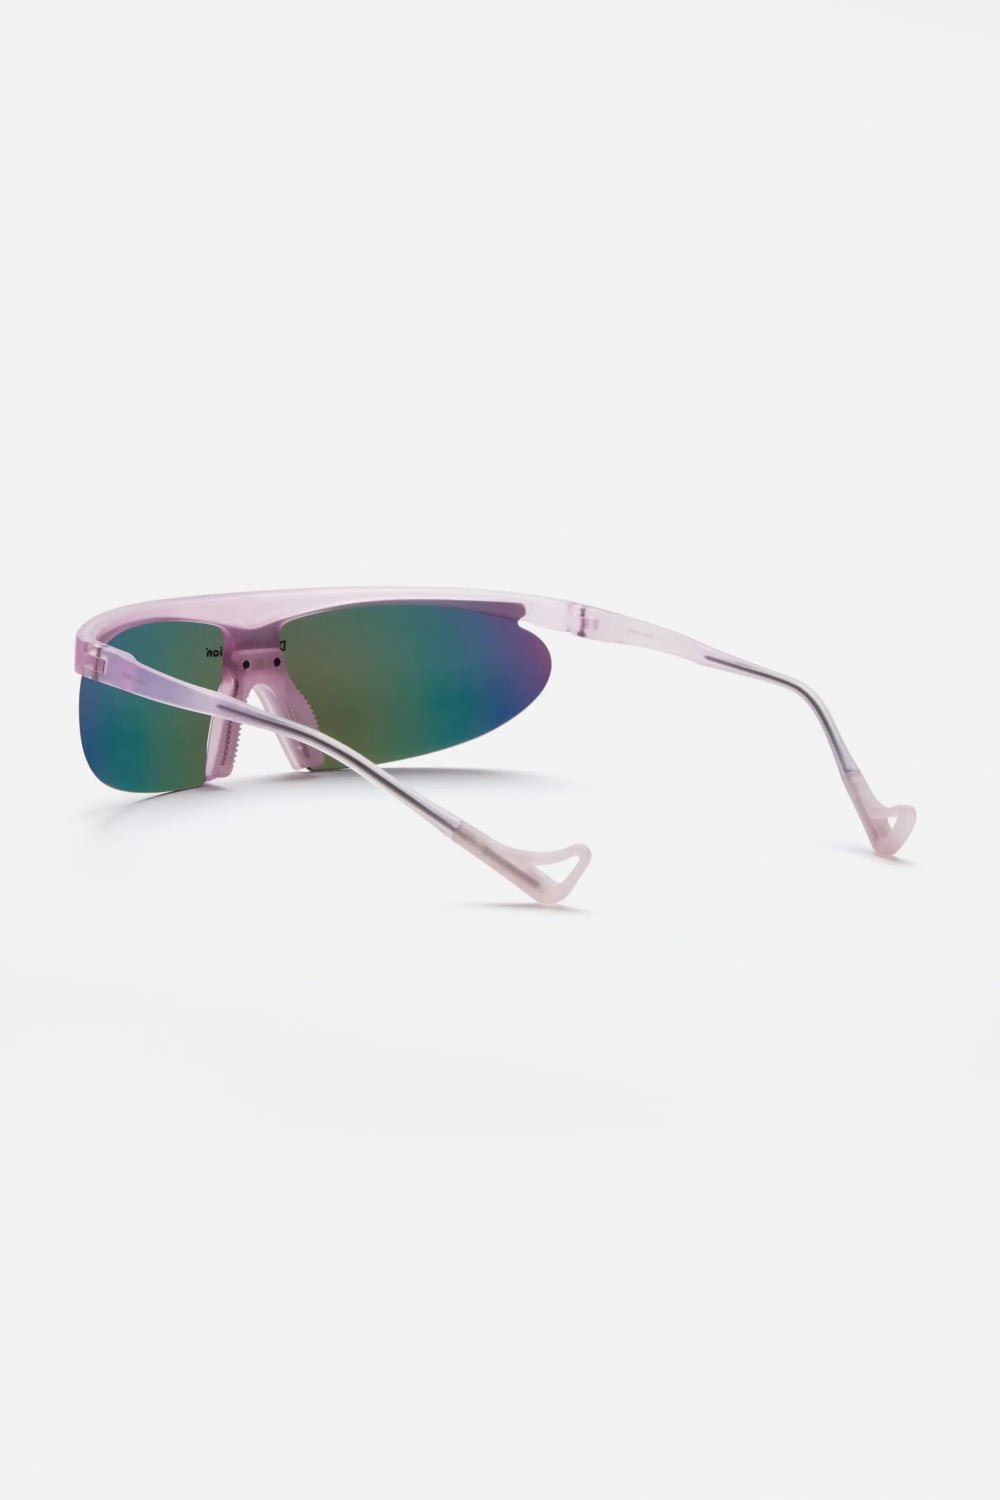 District Vision Koharu Eclipse Sunglasses - Pink Moon/D+ Spectral Mirror | Coffee Outdoors